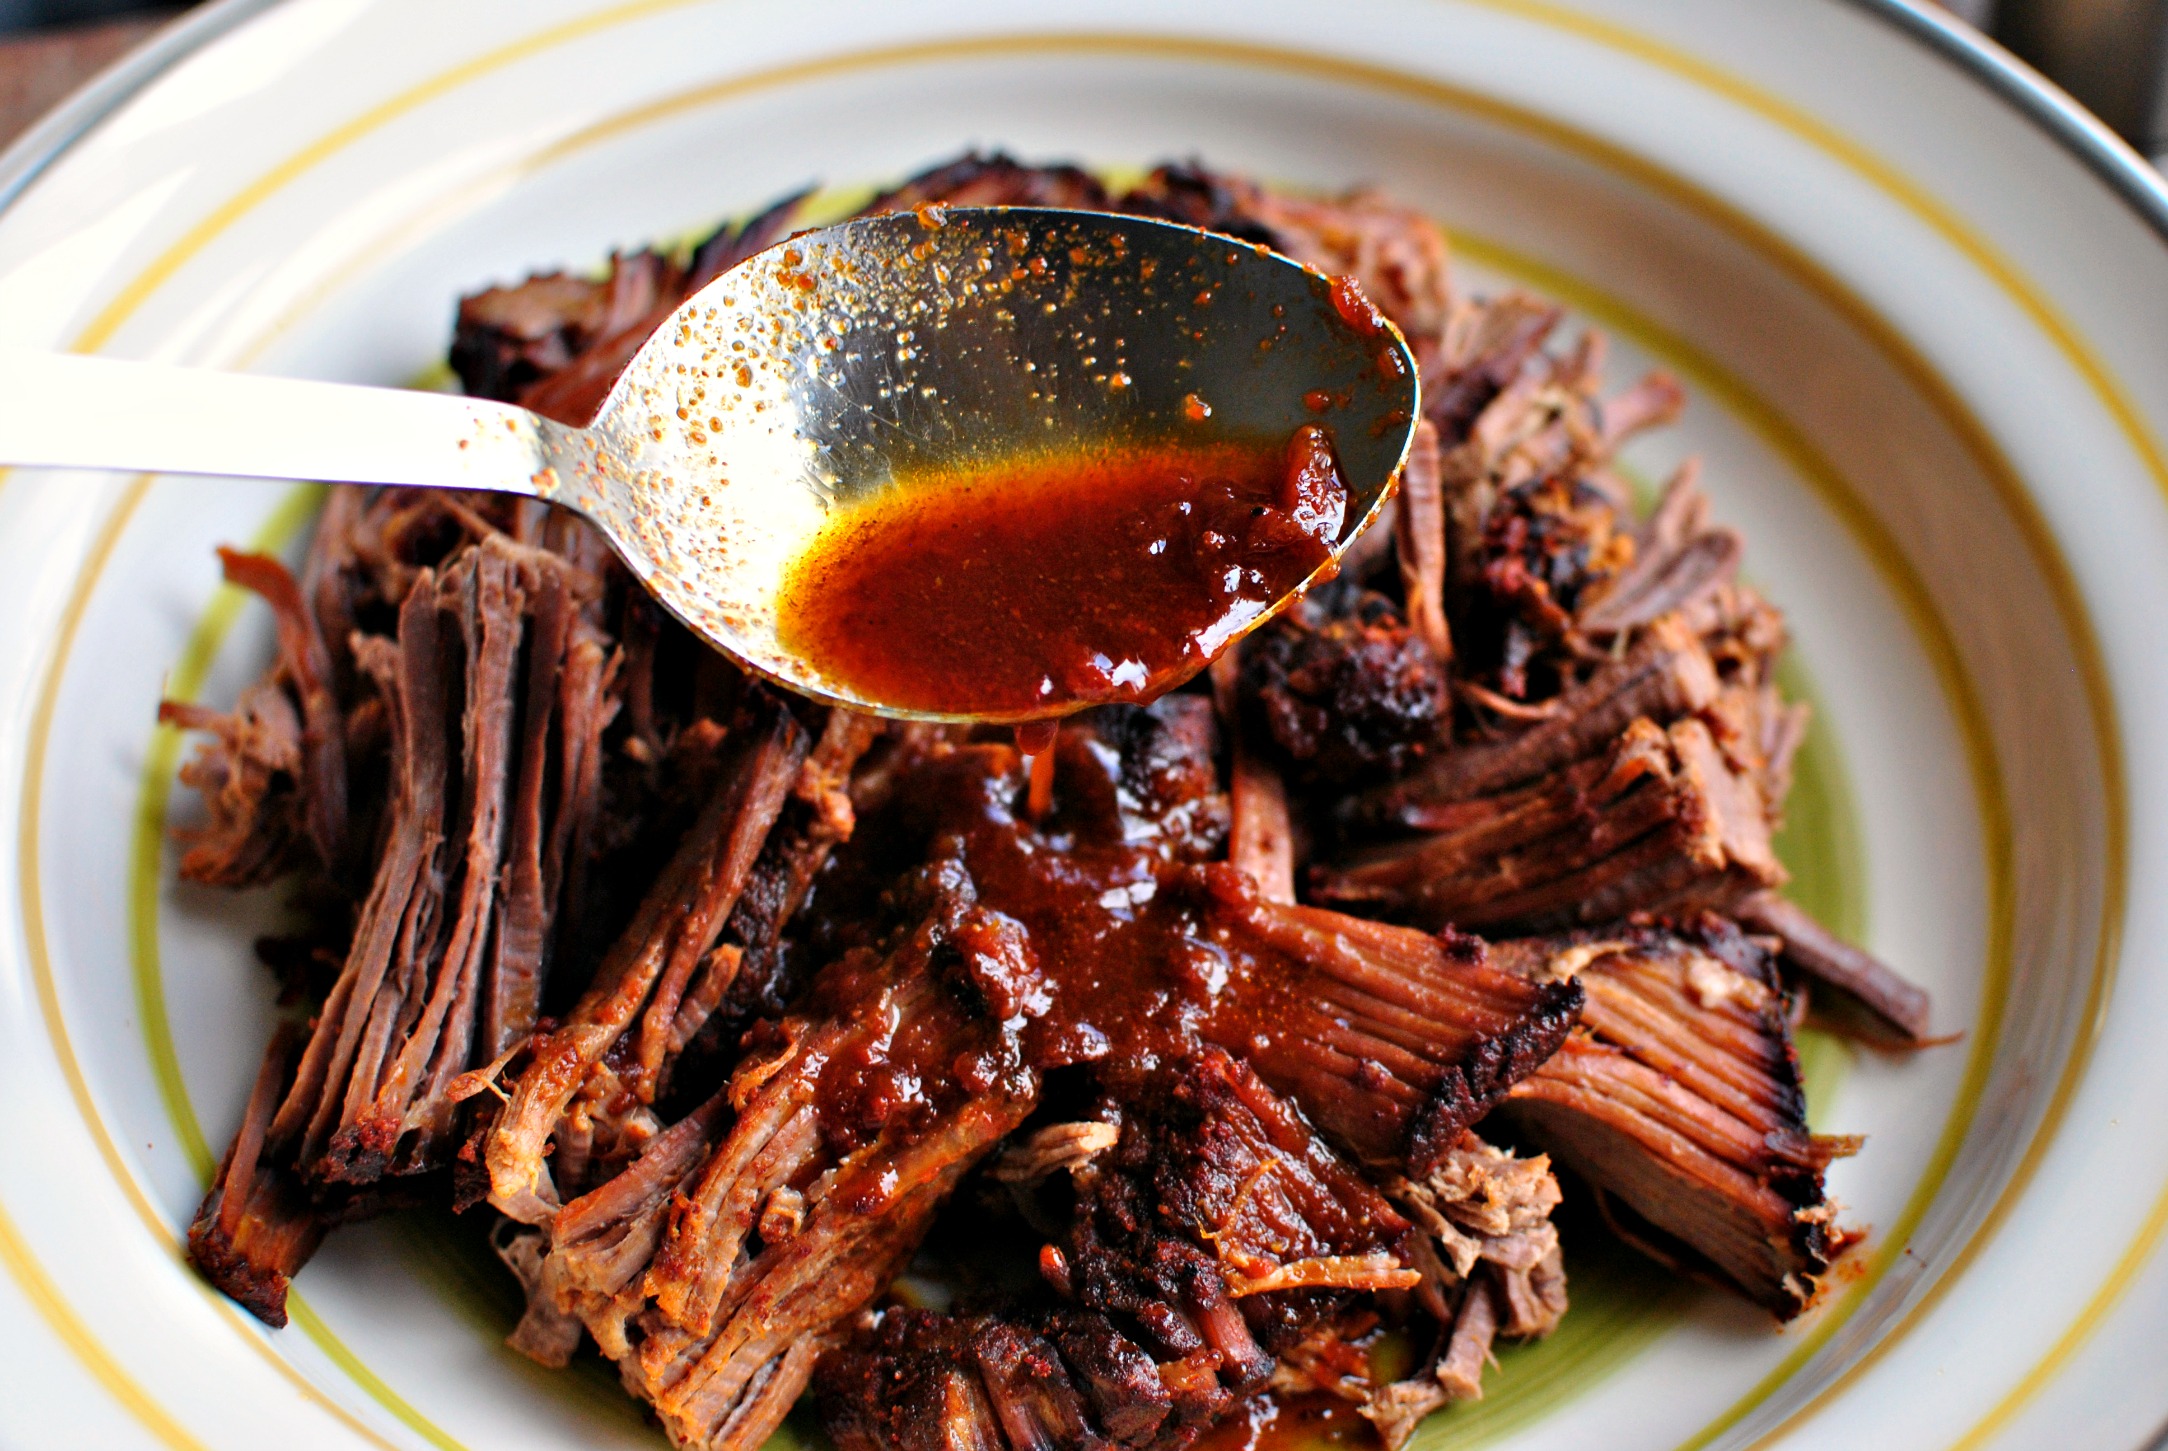 You could place the shredded slow cooker barbecue beef brisket back into th...